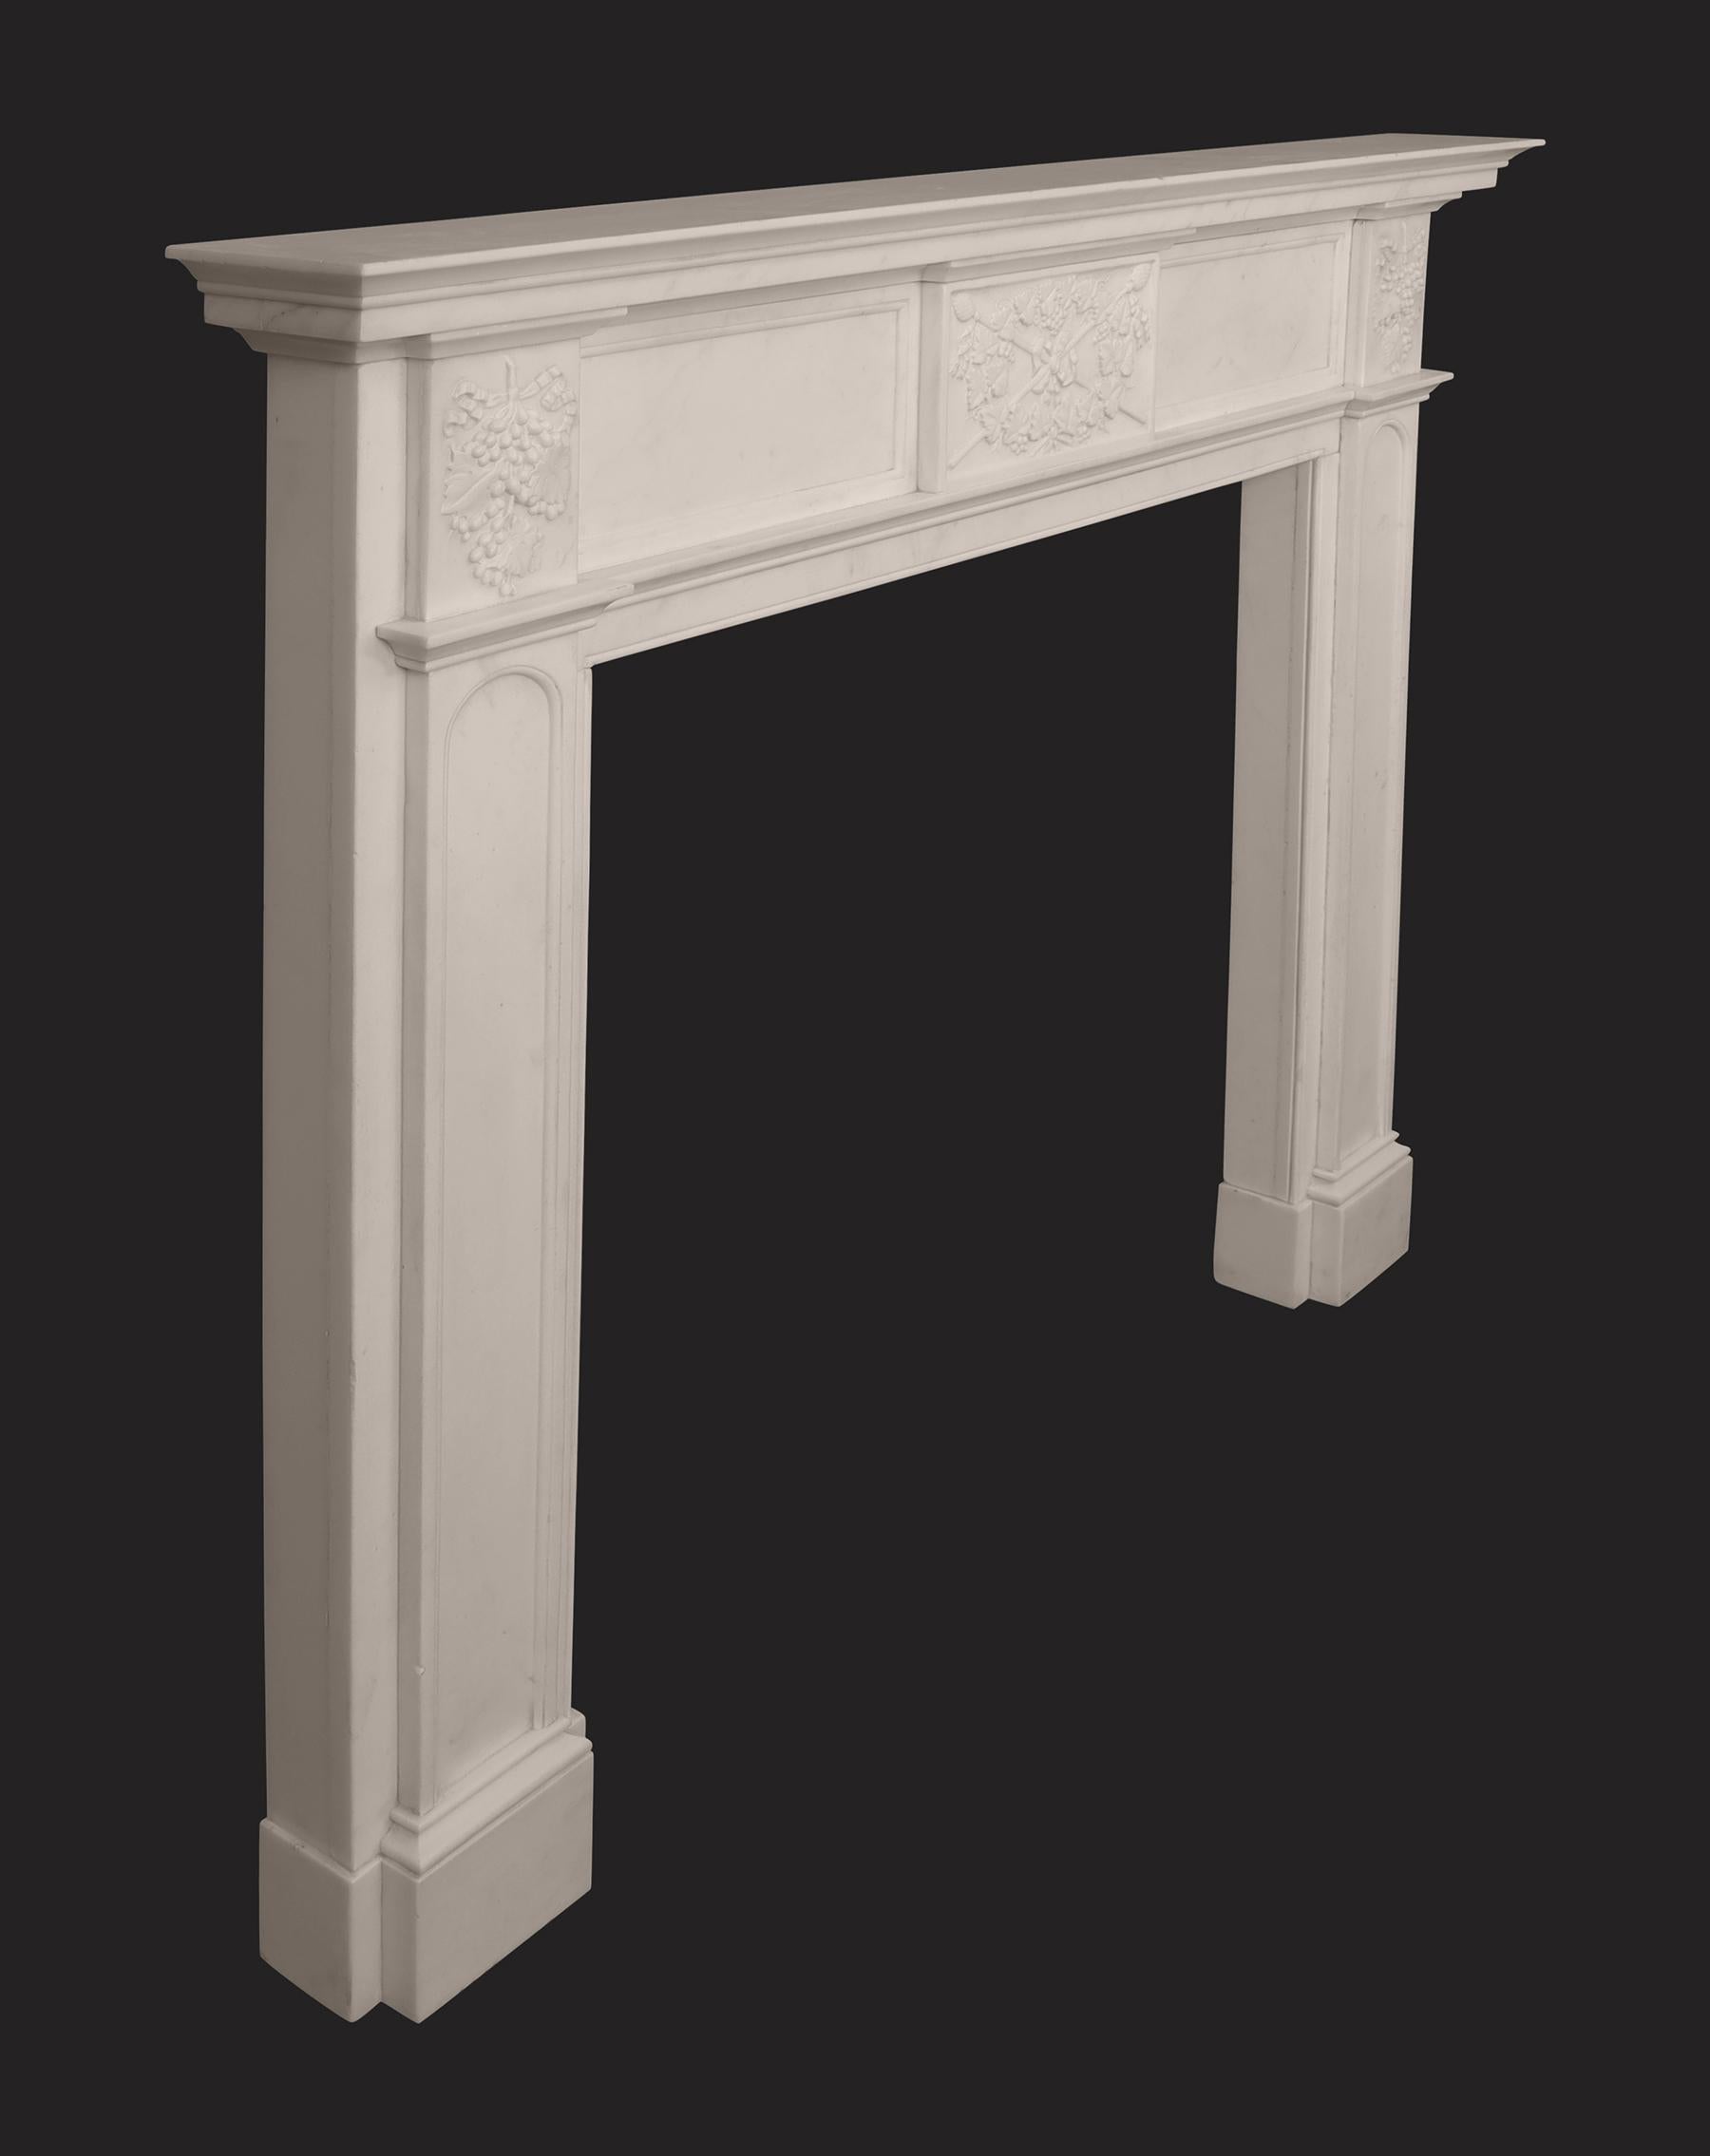 An antique English marble fireplace circa 1830-1840 In Italian white marble with panelled frieze and arched panelled jambs on plinths. The central tablet depicts crossed spears, with ribbons and vine wreath under a finely moulded shelf. The corner